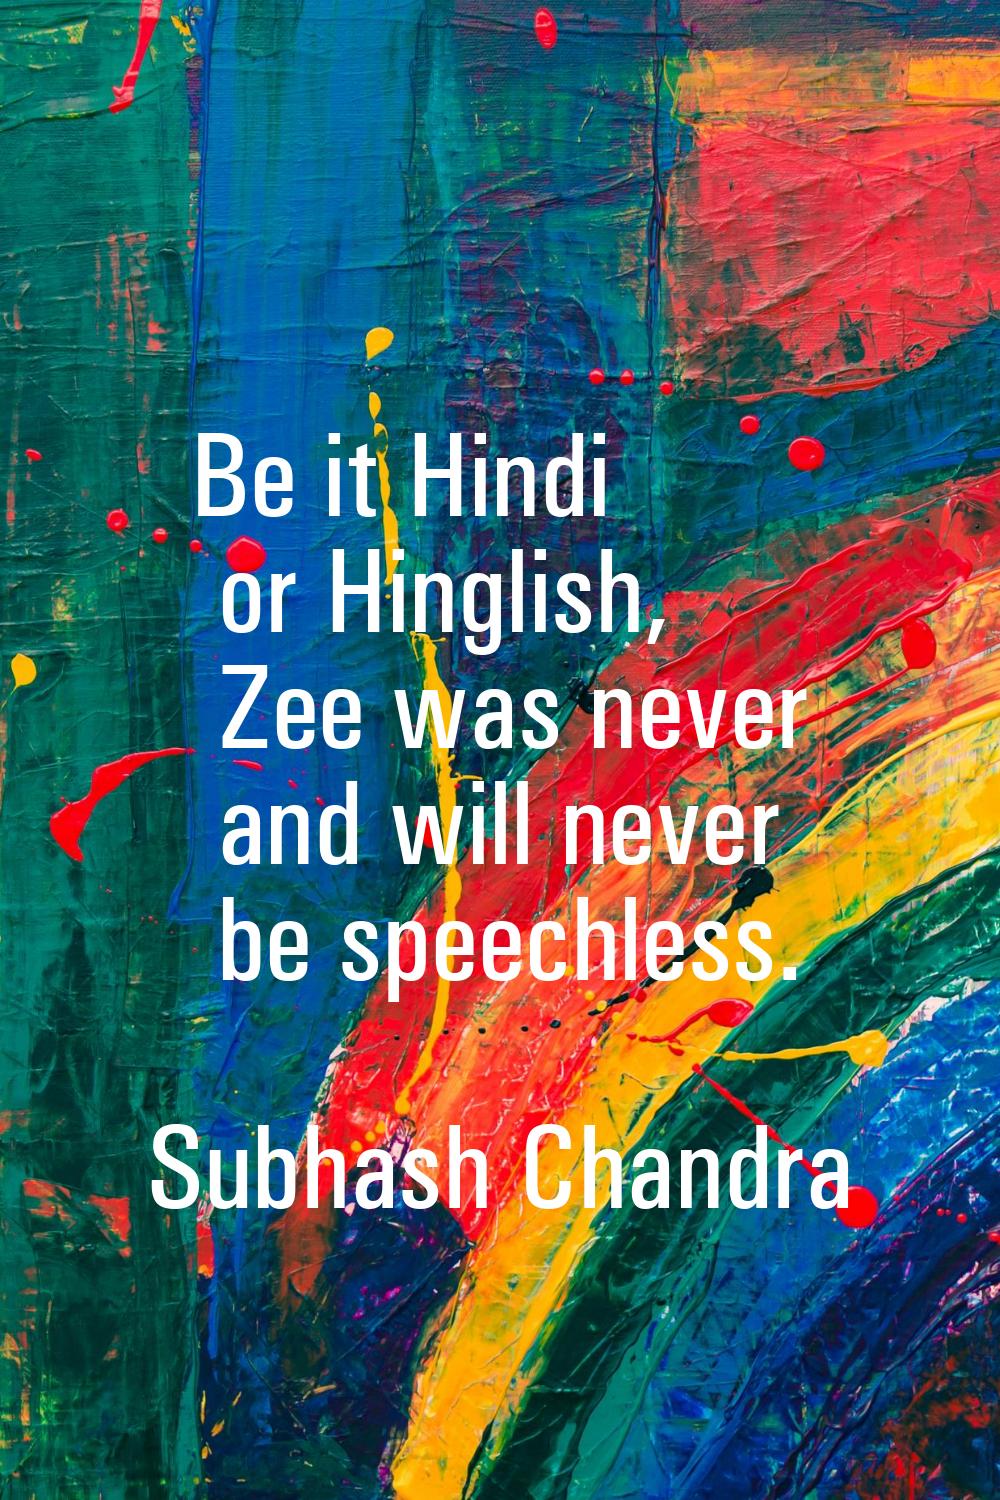 Be it Hindi or Hinglish, Zee was never and will never be speechless.